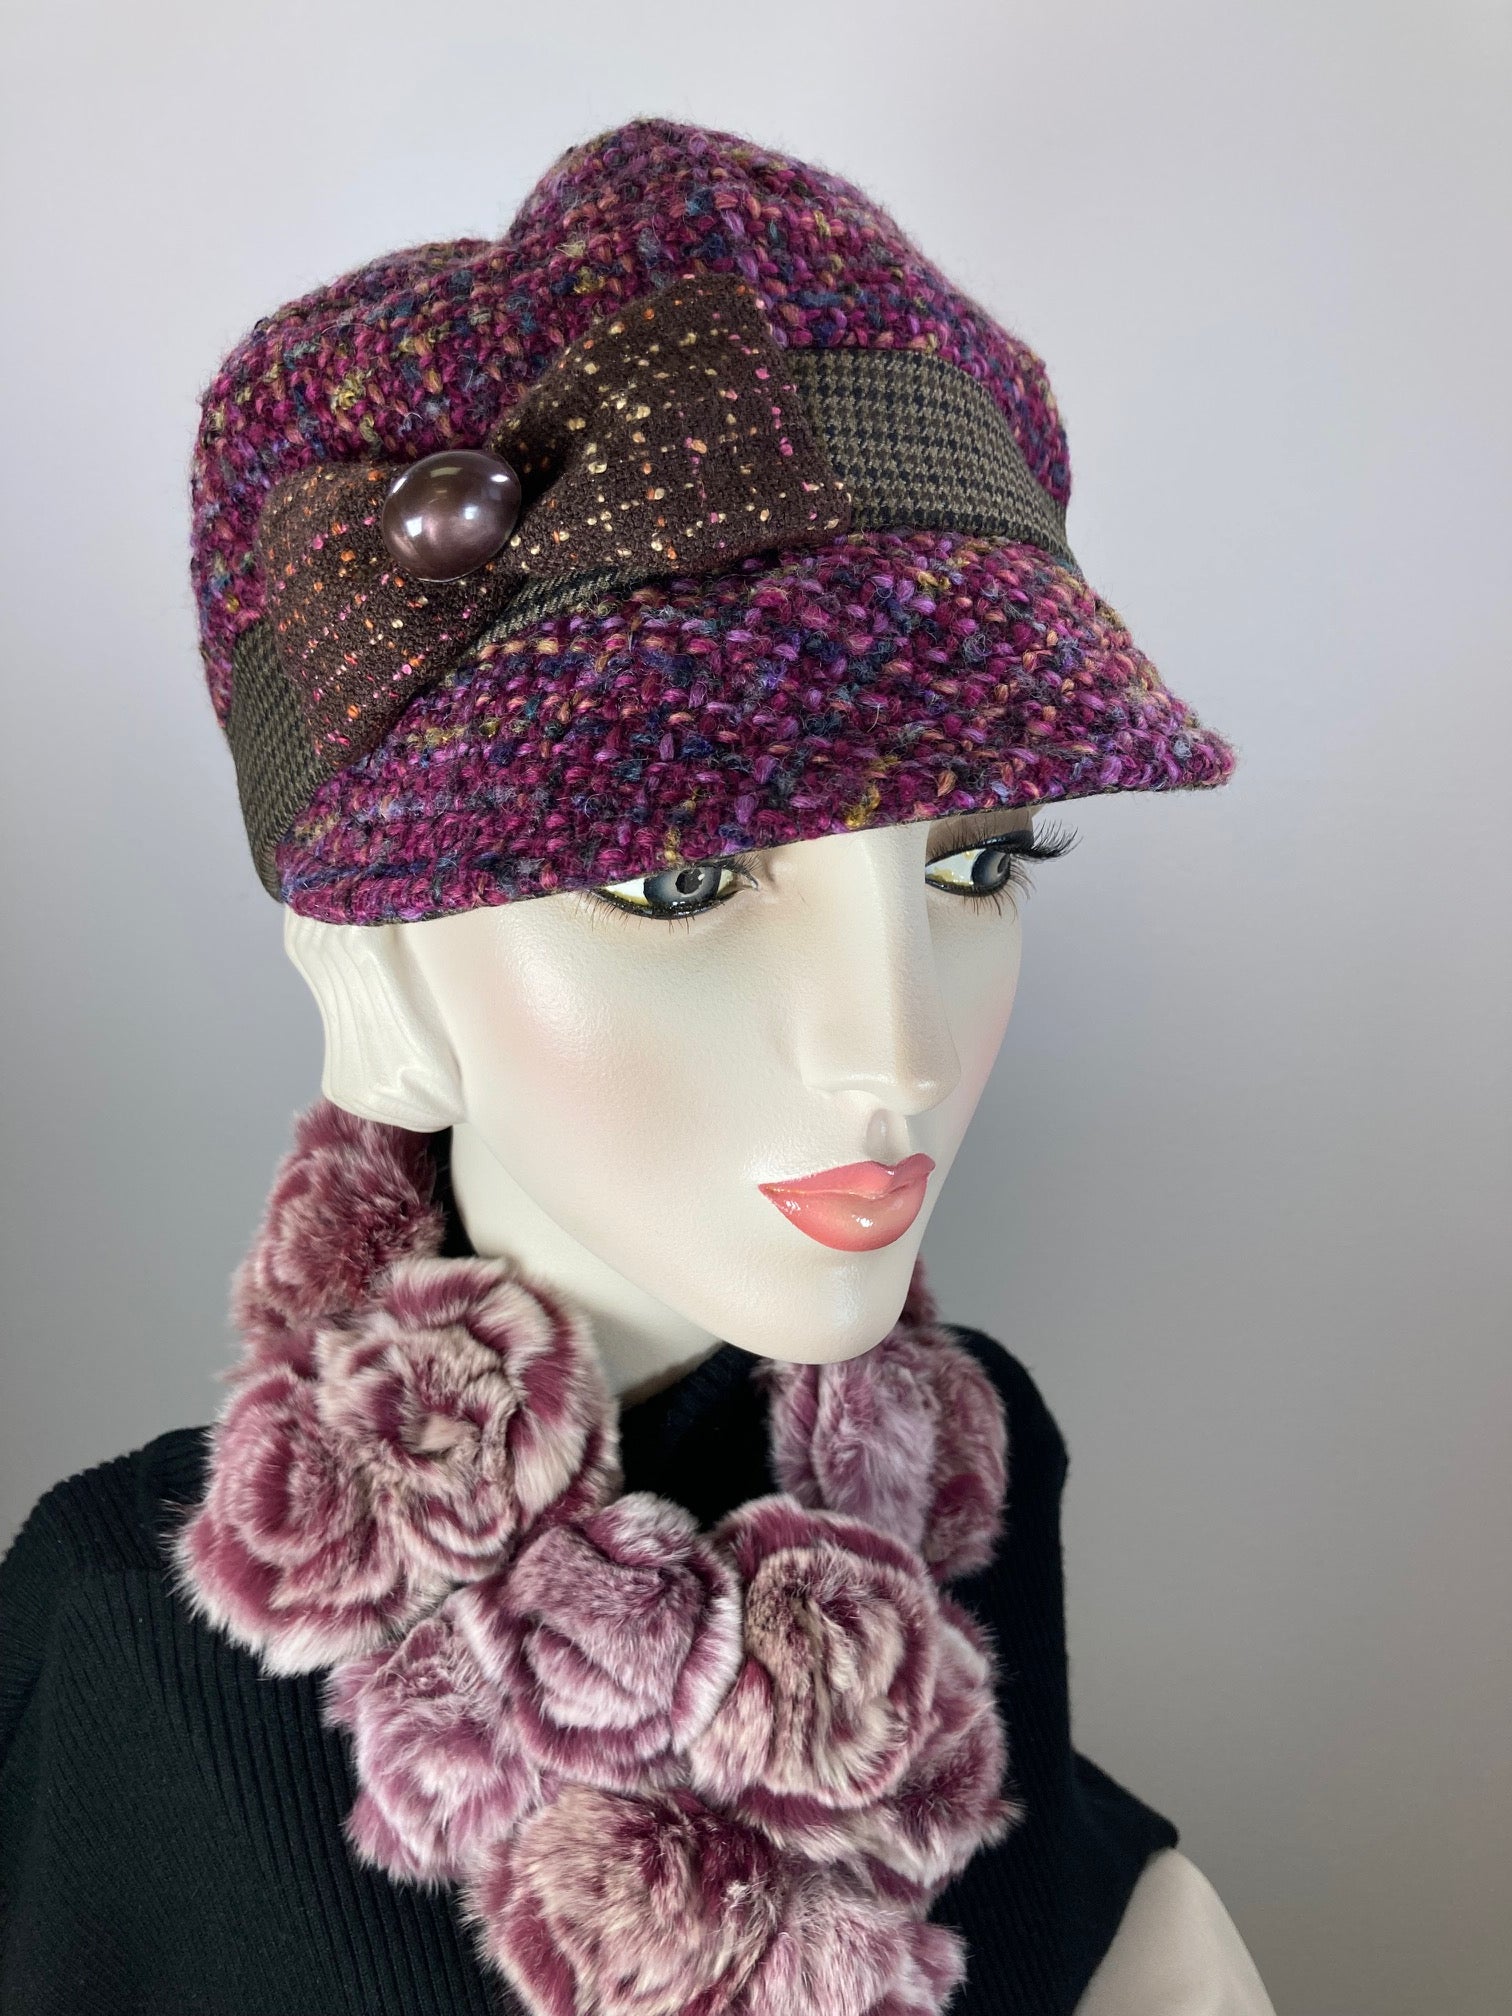 Women's winter hat baseball style. Newsboy hat Berry Pink, purple, brown. Casual comfy warm hat ladies. Fabric travel hat. Ladies soft hat.